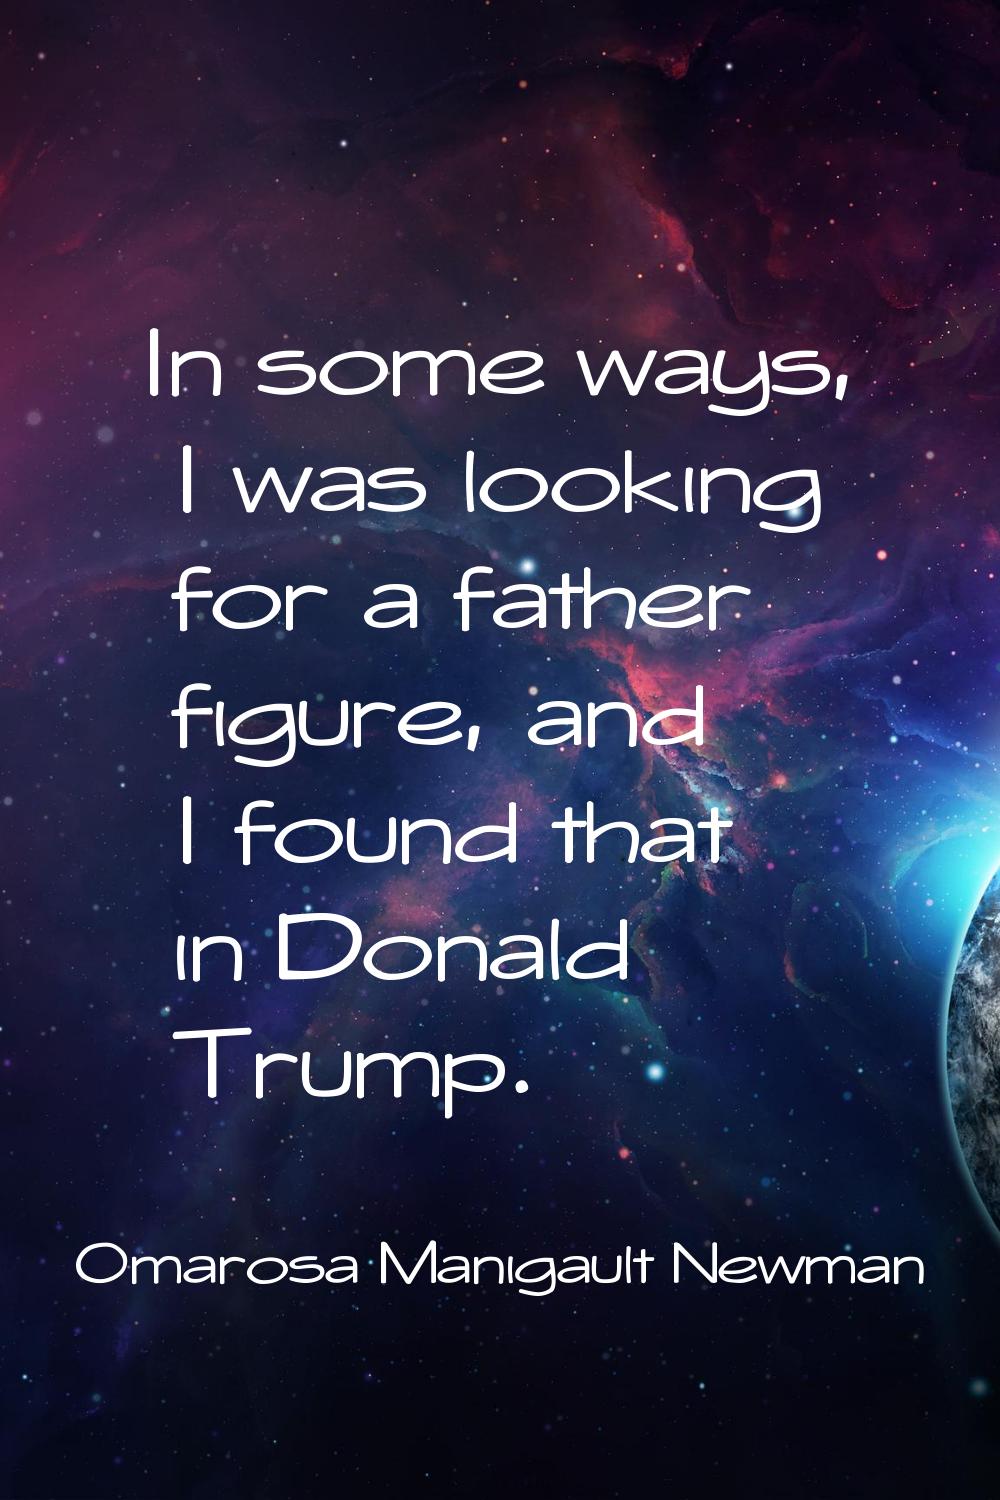 In some ways, I was looking for a father figure, and I found that in Donald Trump.